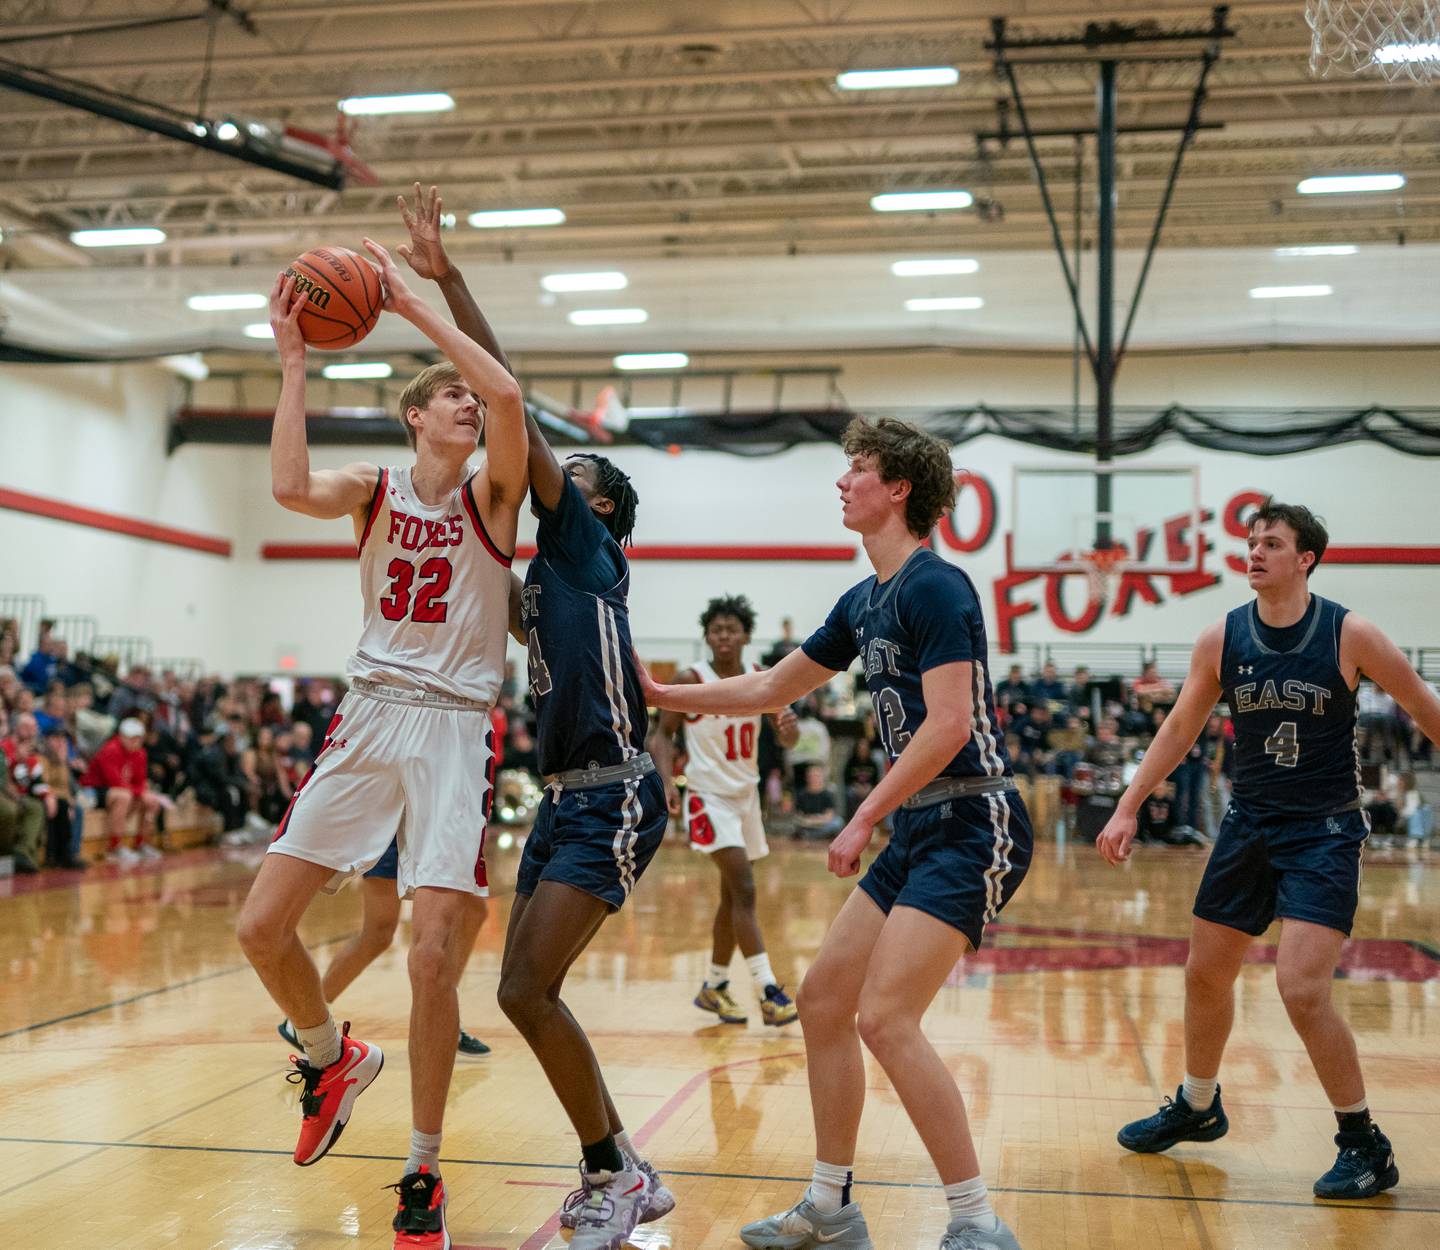 Yorkville's Jason Jakstys (32) shoots the ball in the post against Oswego East's Mekhi Lowery (24) during a basketball game at Yorkville High School on Friday, Feb 3, 2023.